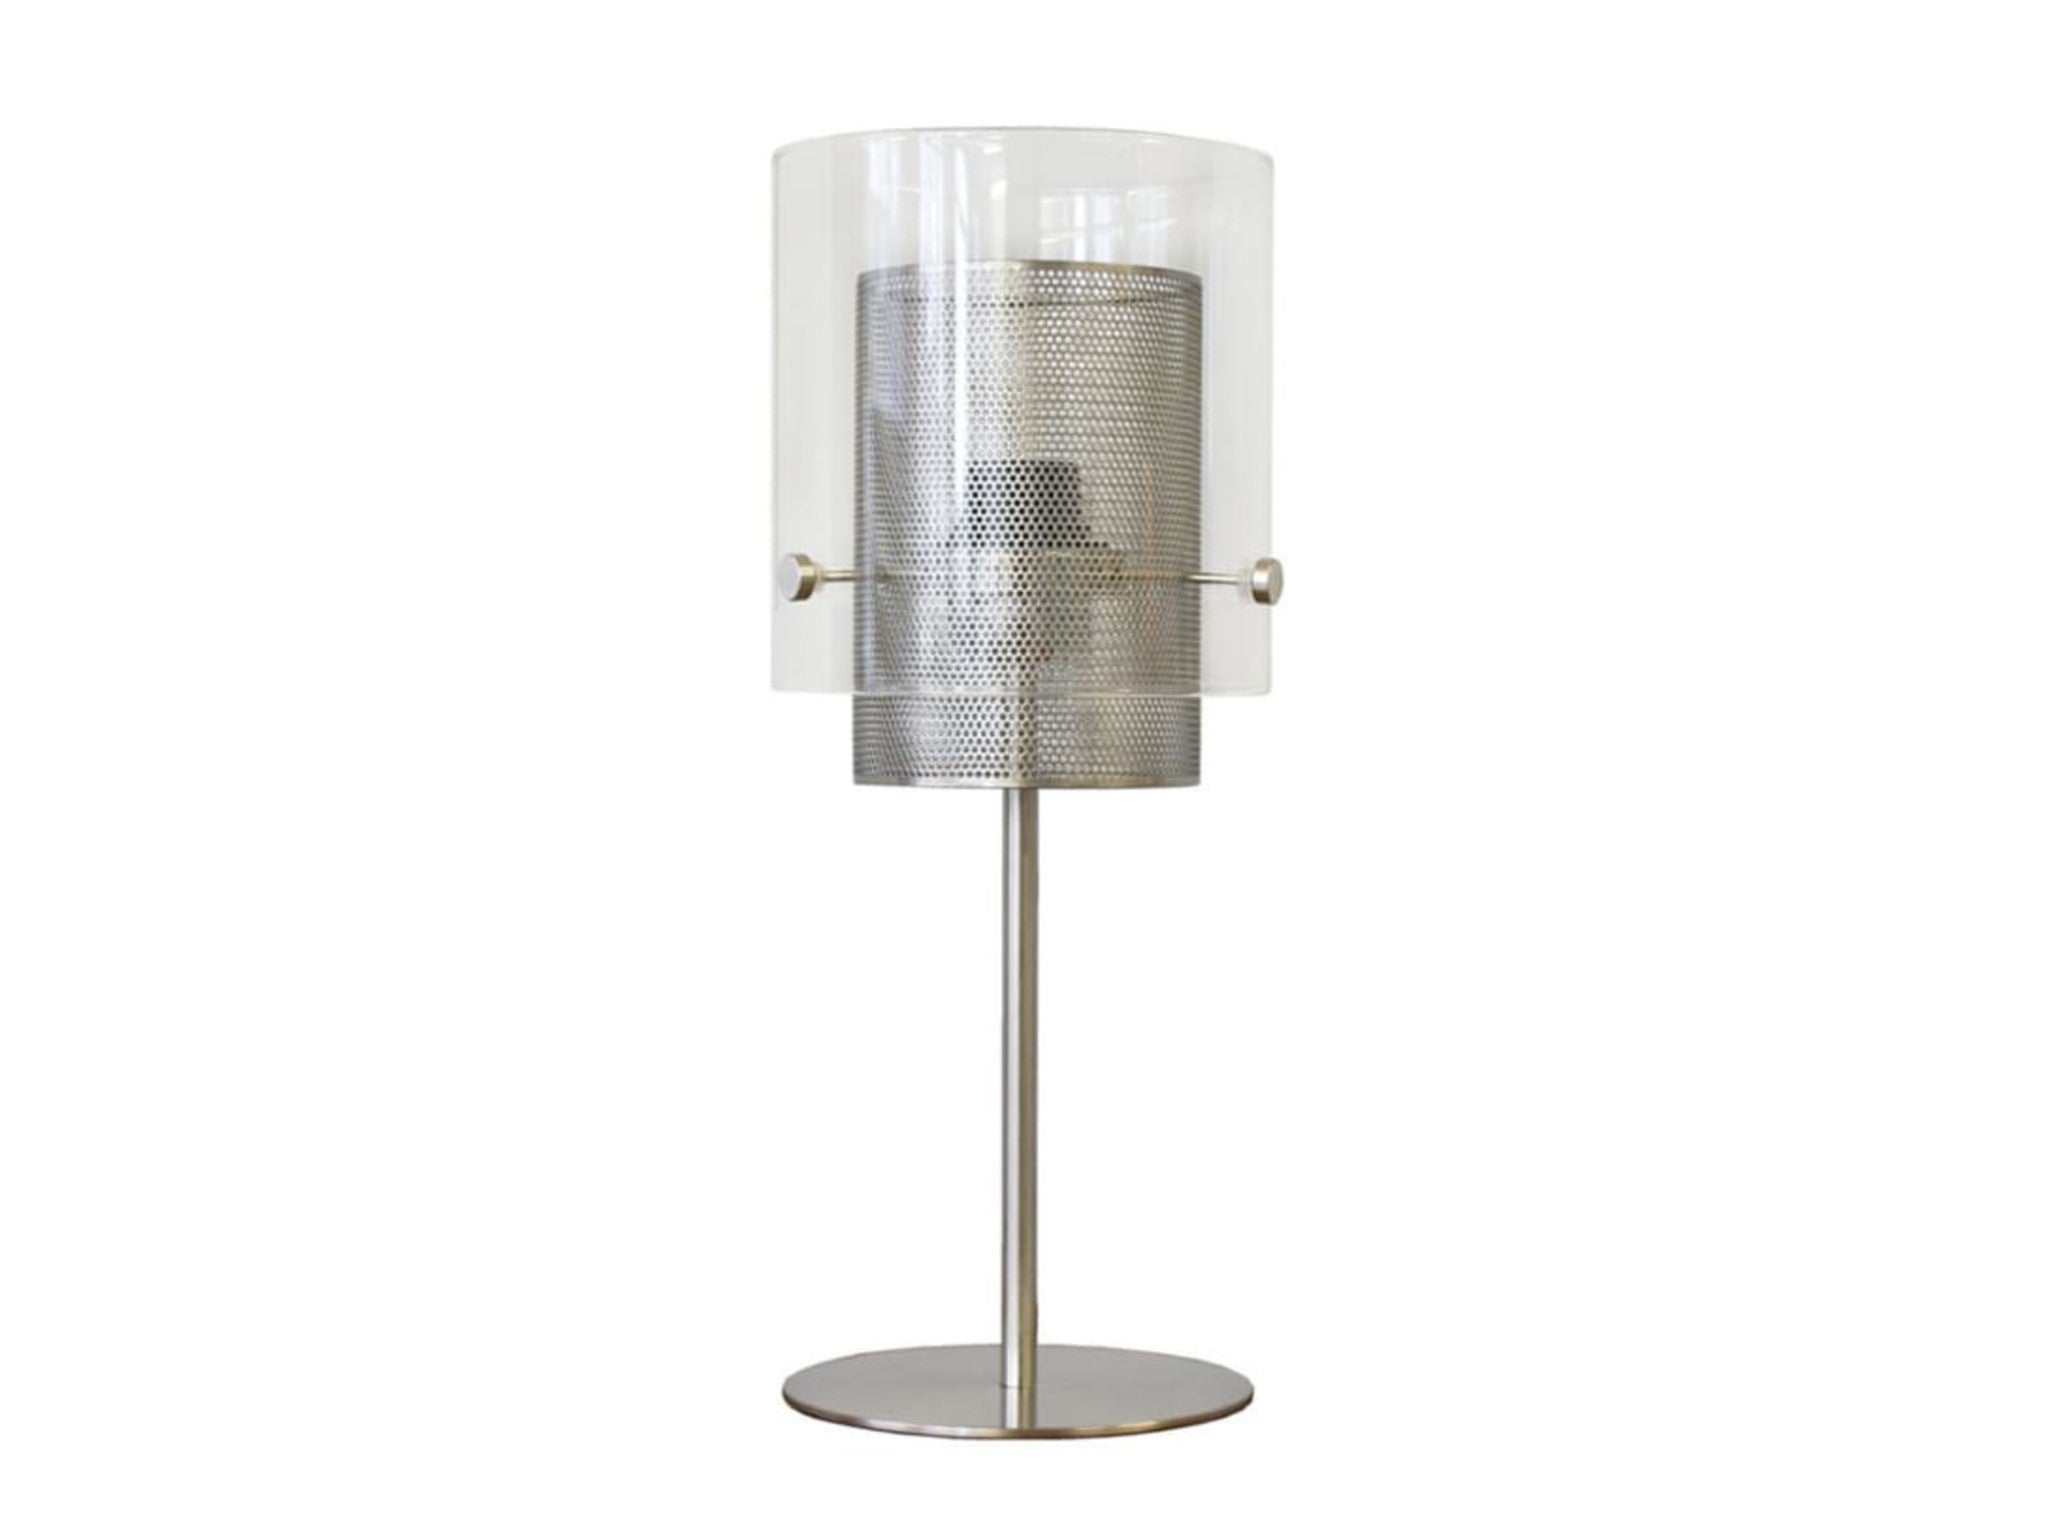 Raft chalgrove table lamp in silver indybest.jpeg